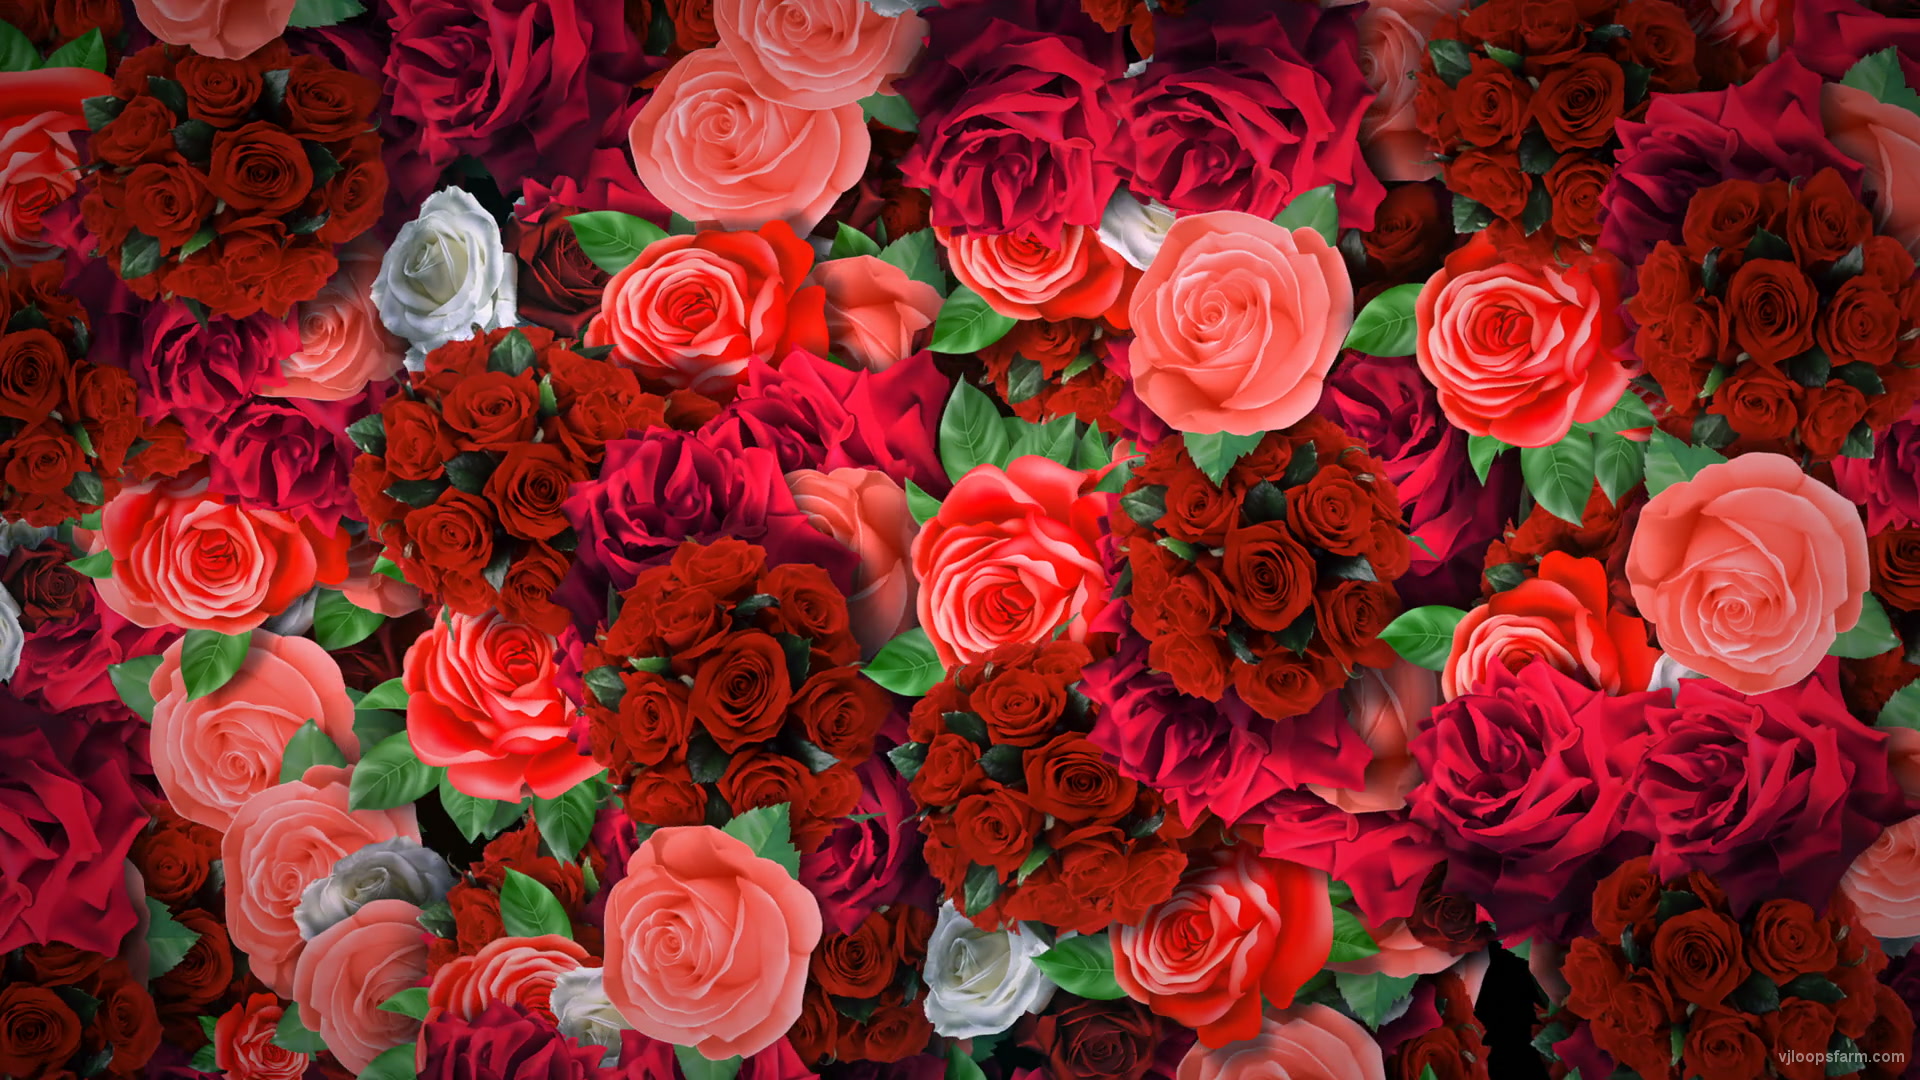 Festive Looped Decoration of Roses Flowers Counter-Move Flows